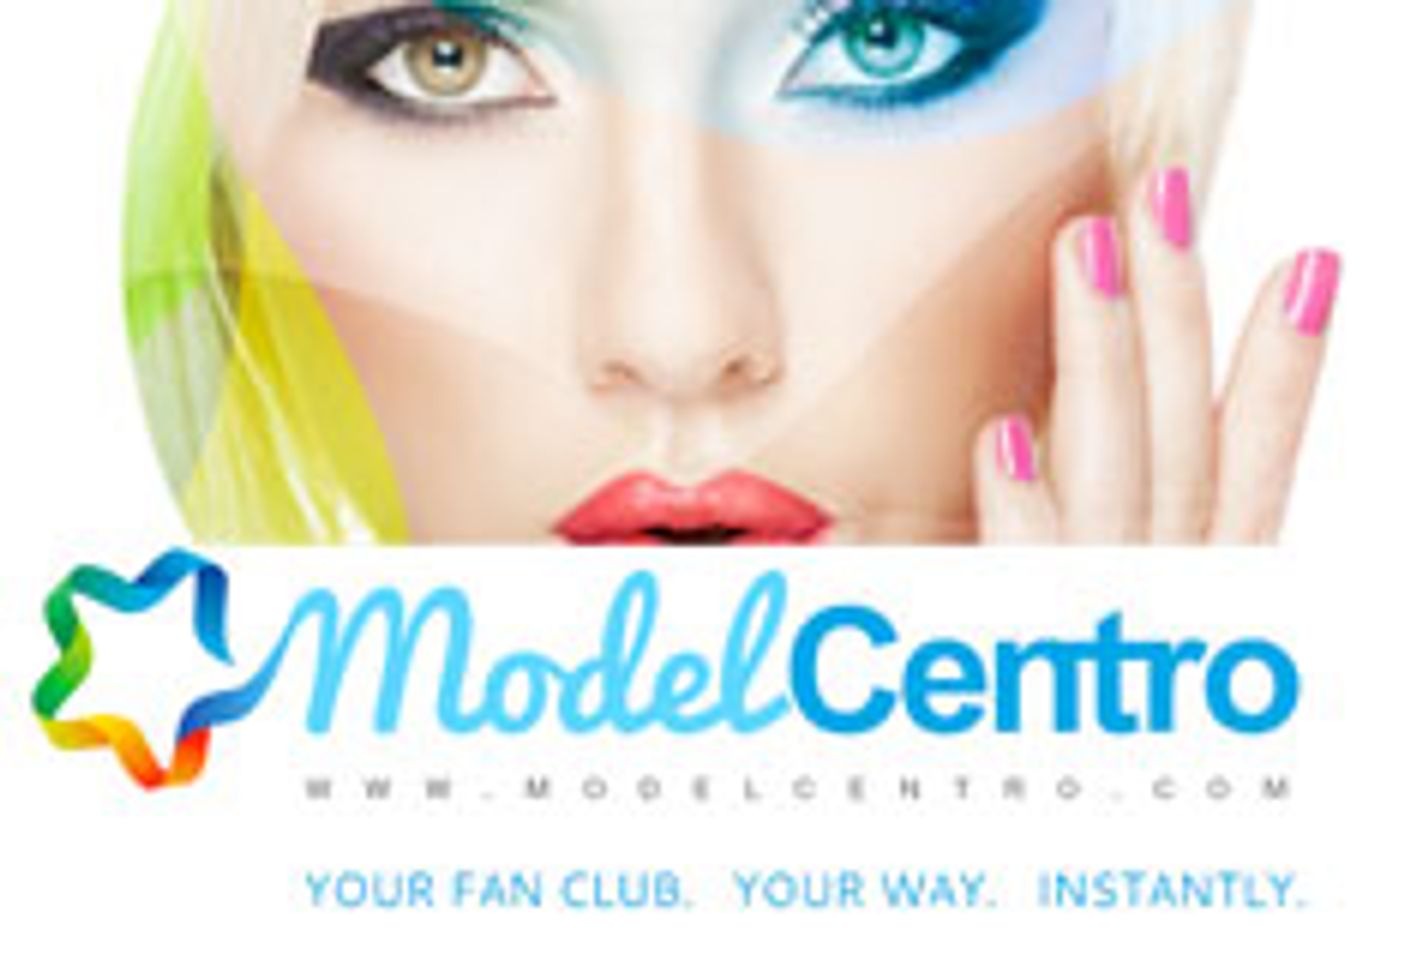 ModelCentro Celebrates First Year with Twitter Contest